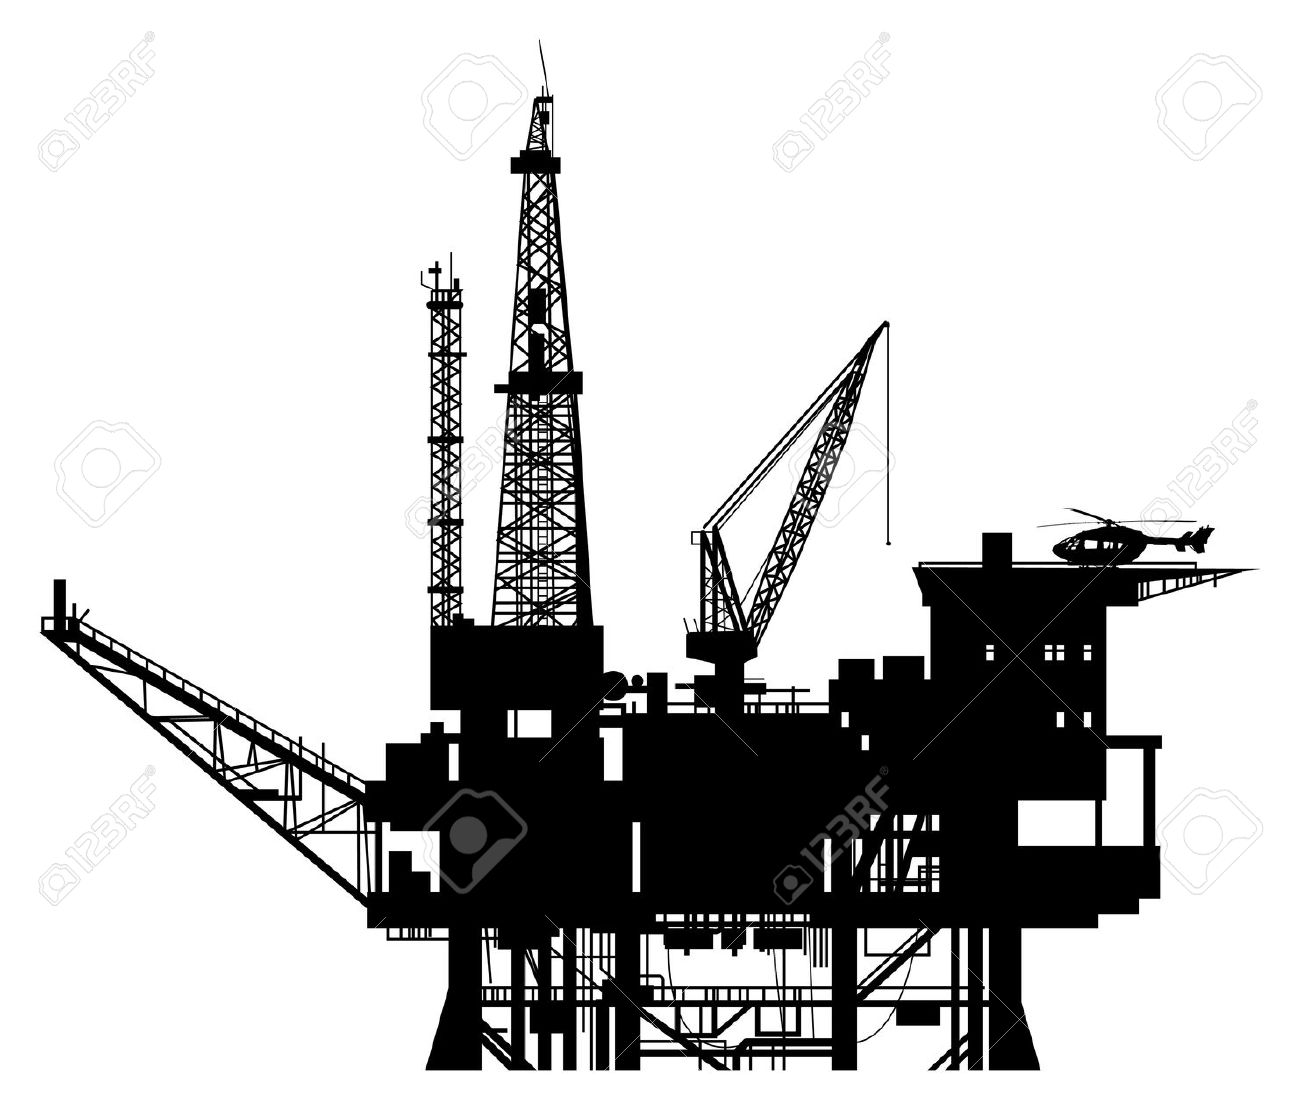 Free Oil Rig Clipart. oil rig: Oil drilling rig .